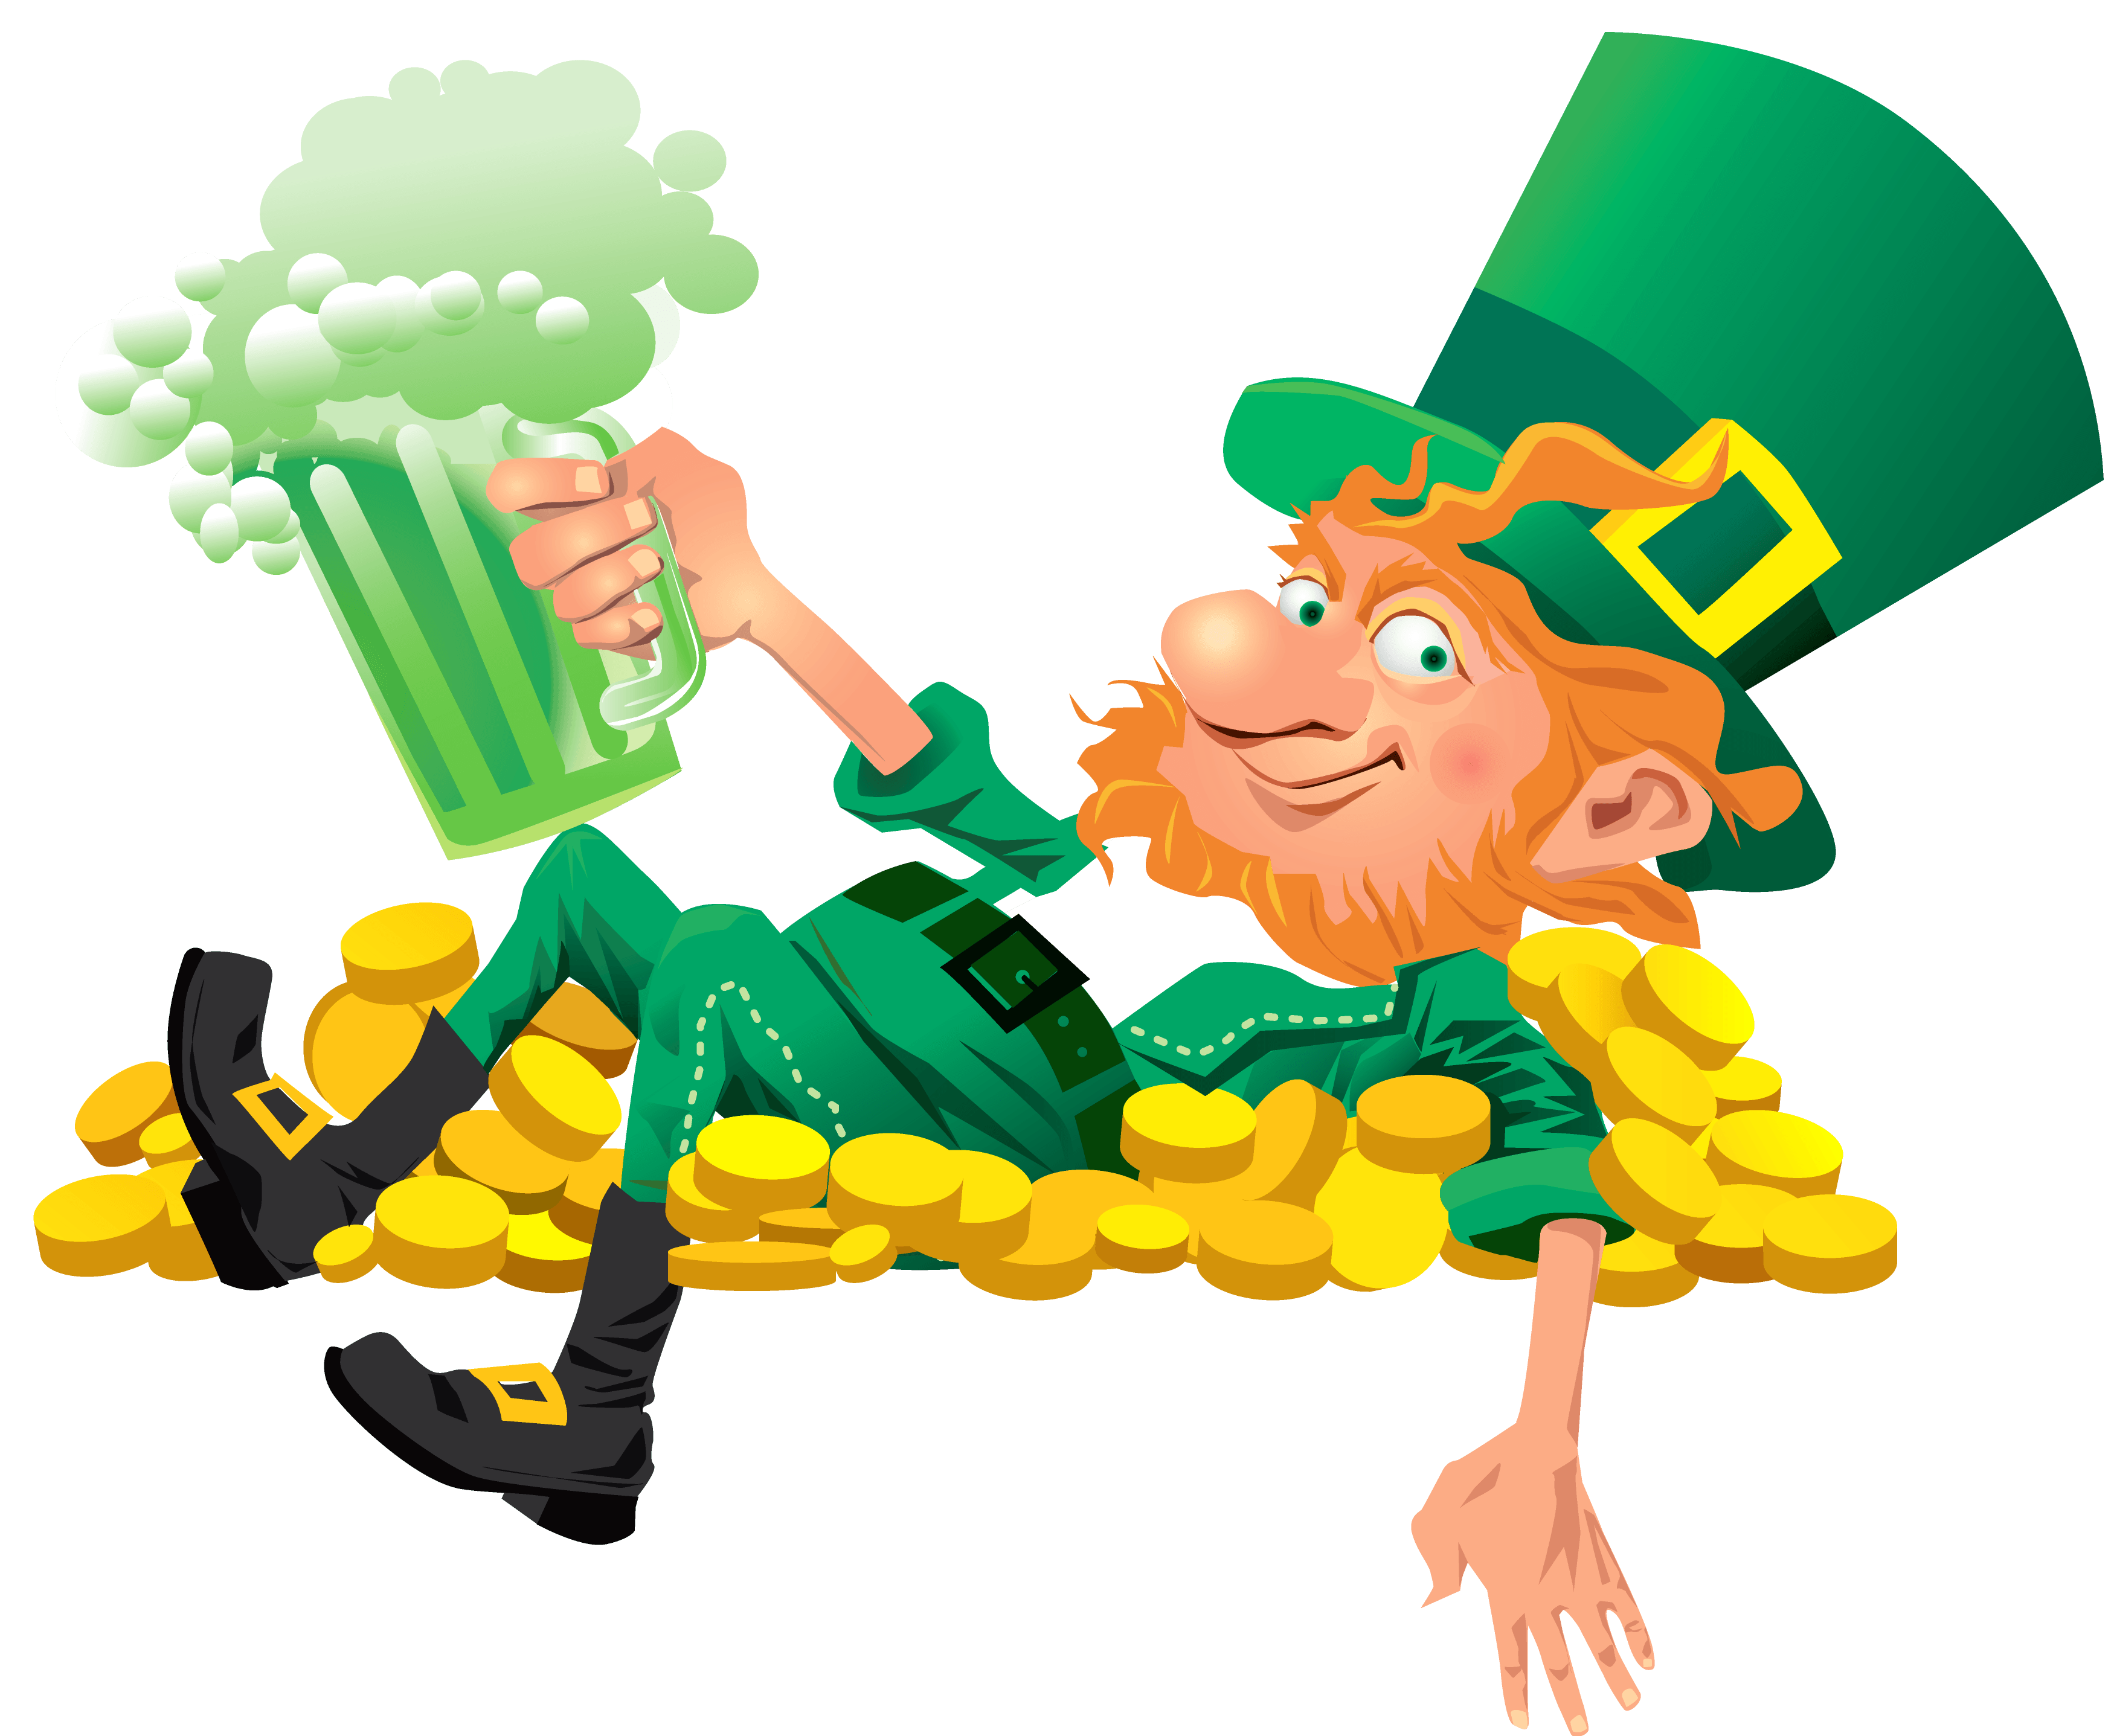 Wallpaper Cave Graphic Free - St Patrick's Day Leprechaun Beer , HD Wallpaper & Backgrounds